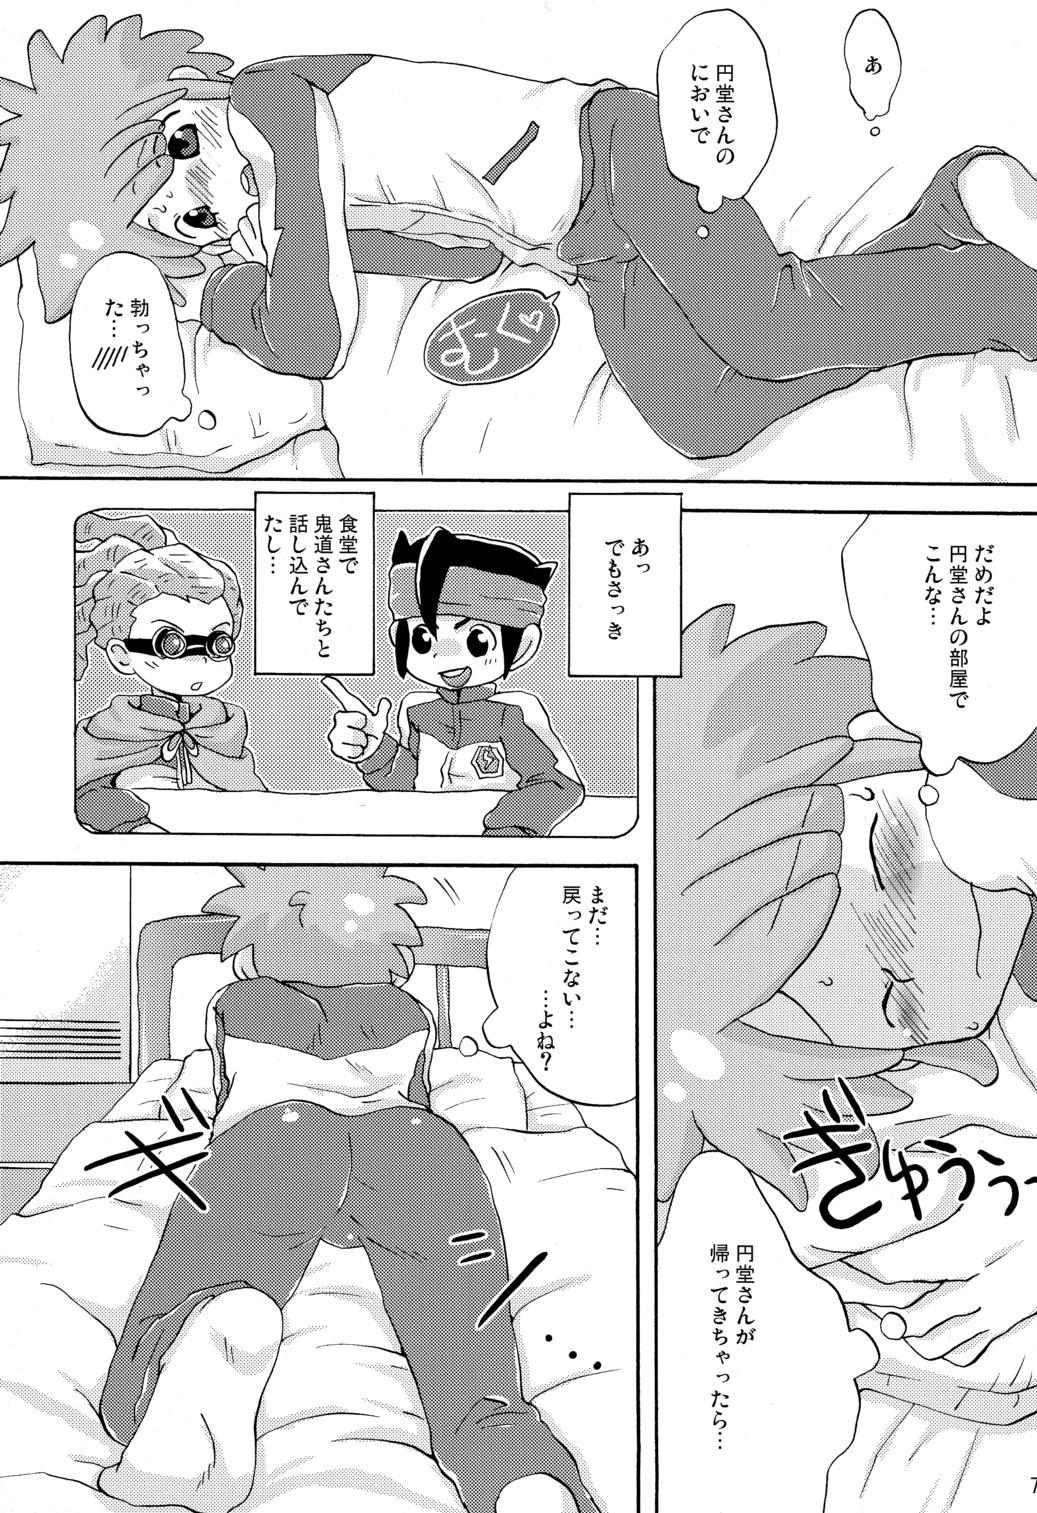 Public Sex SWEET ROOM - Inazuma eleven Free 18 Year Old Porn - Page 7